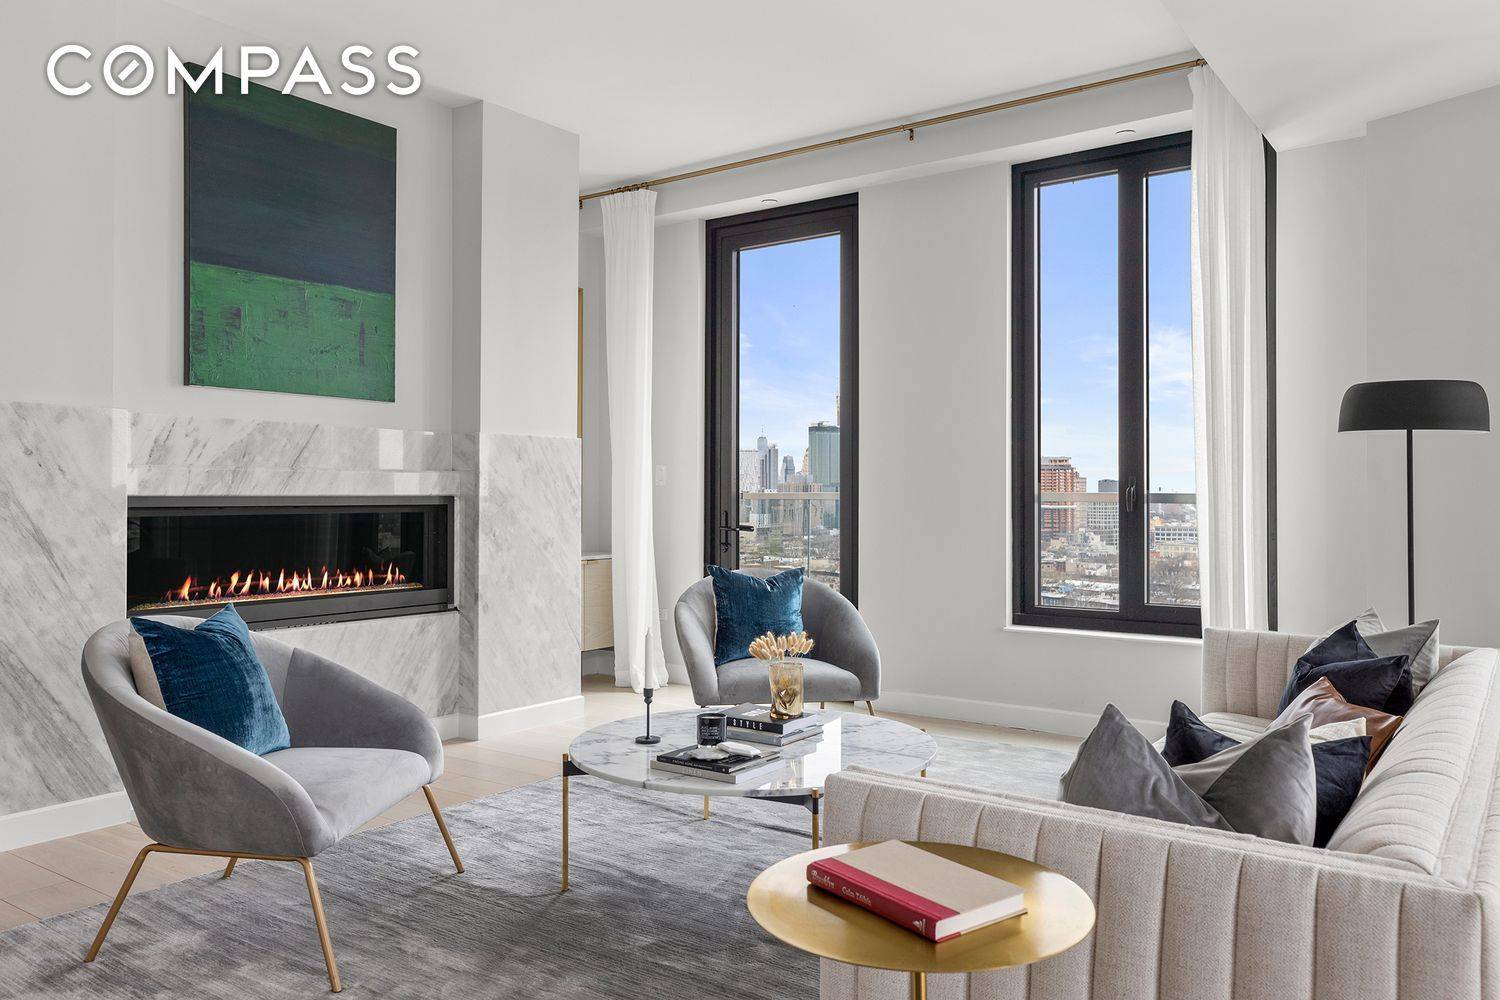 Immediate Occupancy ! Presenting The Penthouse Collection at 856 Washington Street, these three meticulously designed full floor residences offer unparalleled Brooklyn, City Skyline and Prospect Park views, sprawling oversized layouts, ...